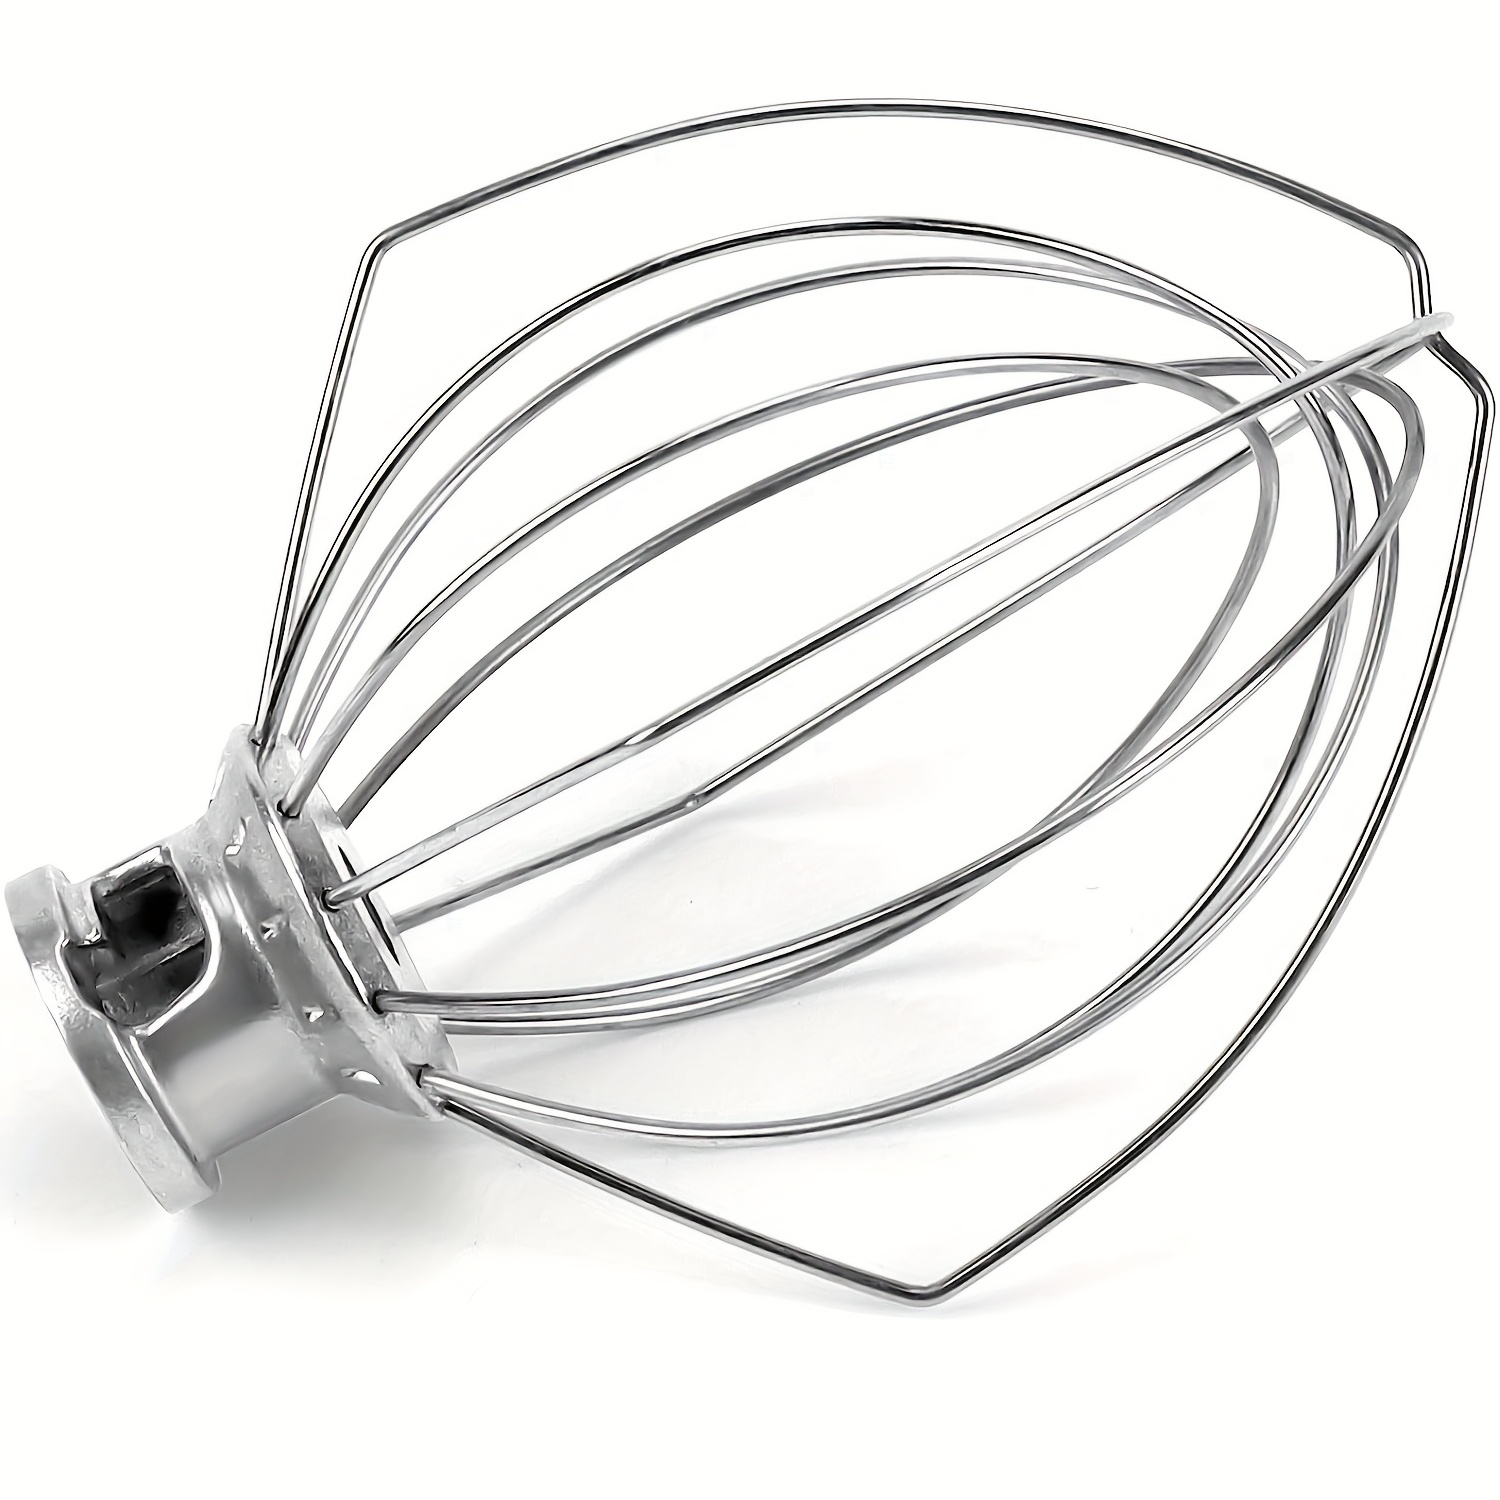 Stainless Steel Wire Whisk - Manual Kitchen Egg Whipper - Heavy Duty Handle  - Cooking Coil Whisks - Beaters Whip